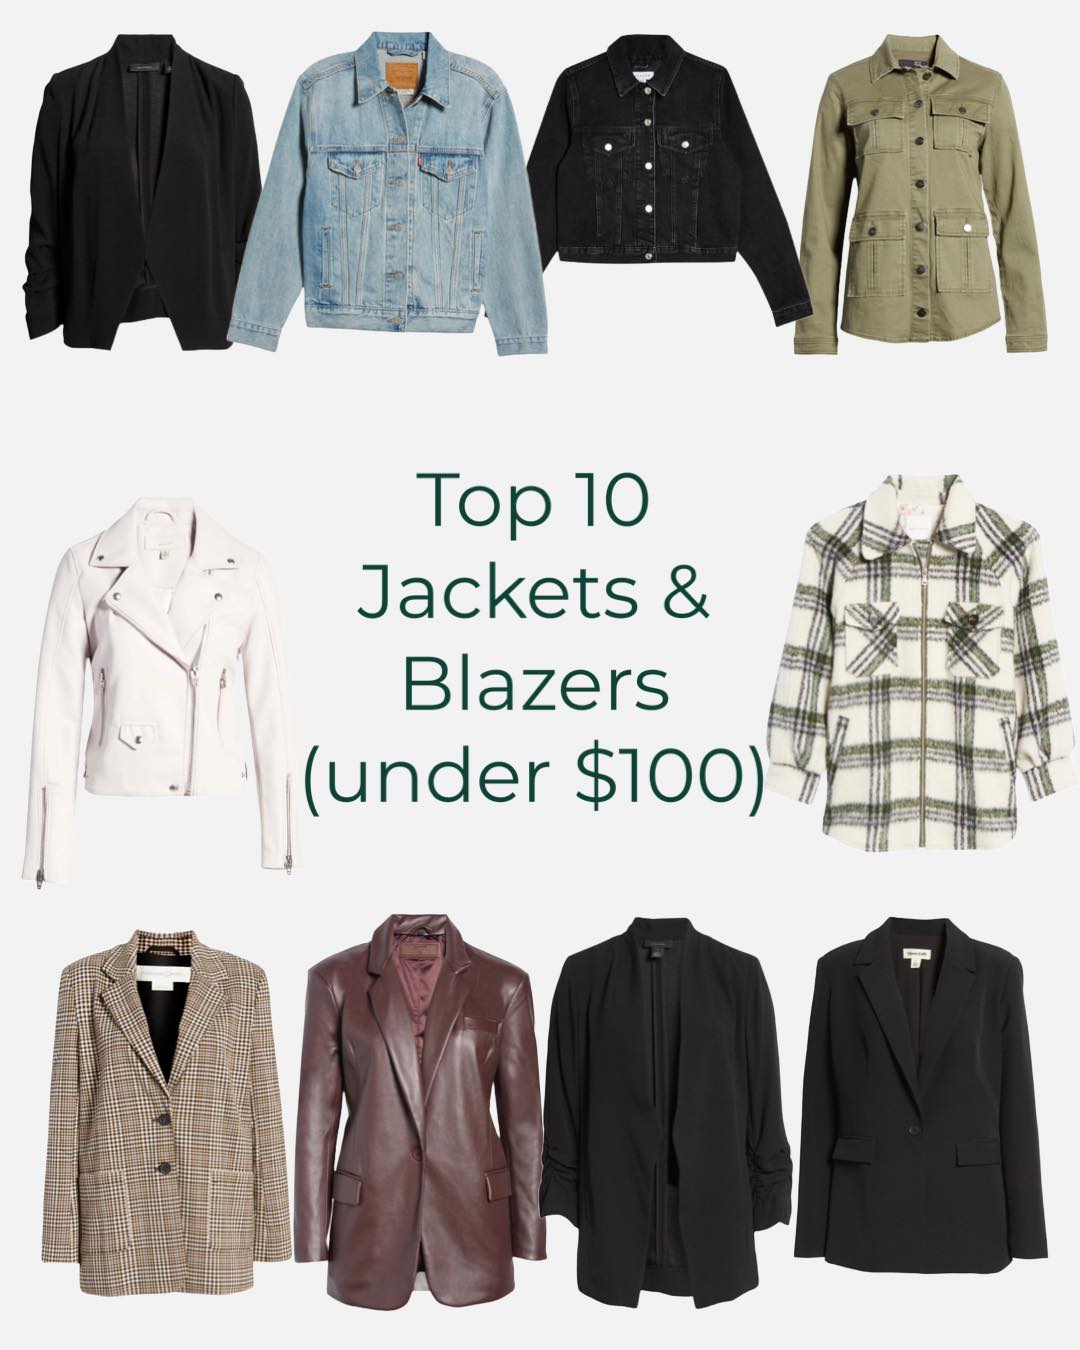 Shop My Top Fall Fashion Picks Under $100 from Nordstrom - Dresses, Blazers, Jackets, Coats, and Pants